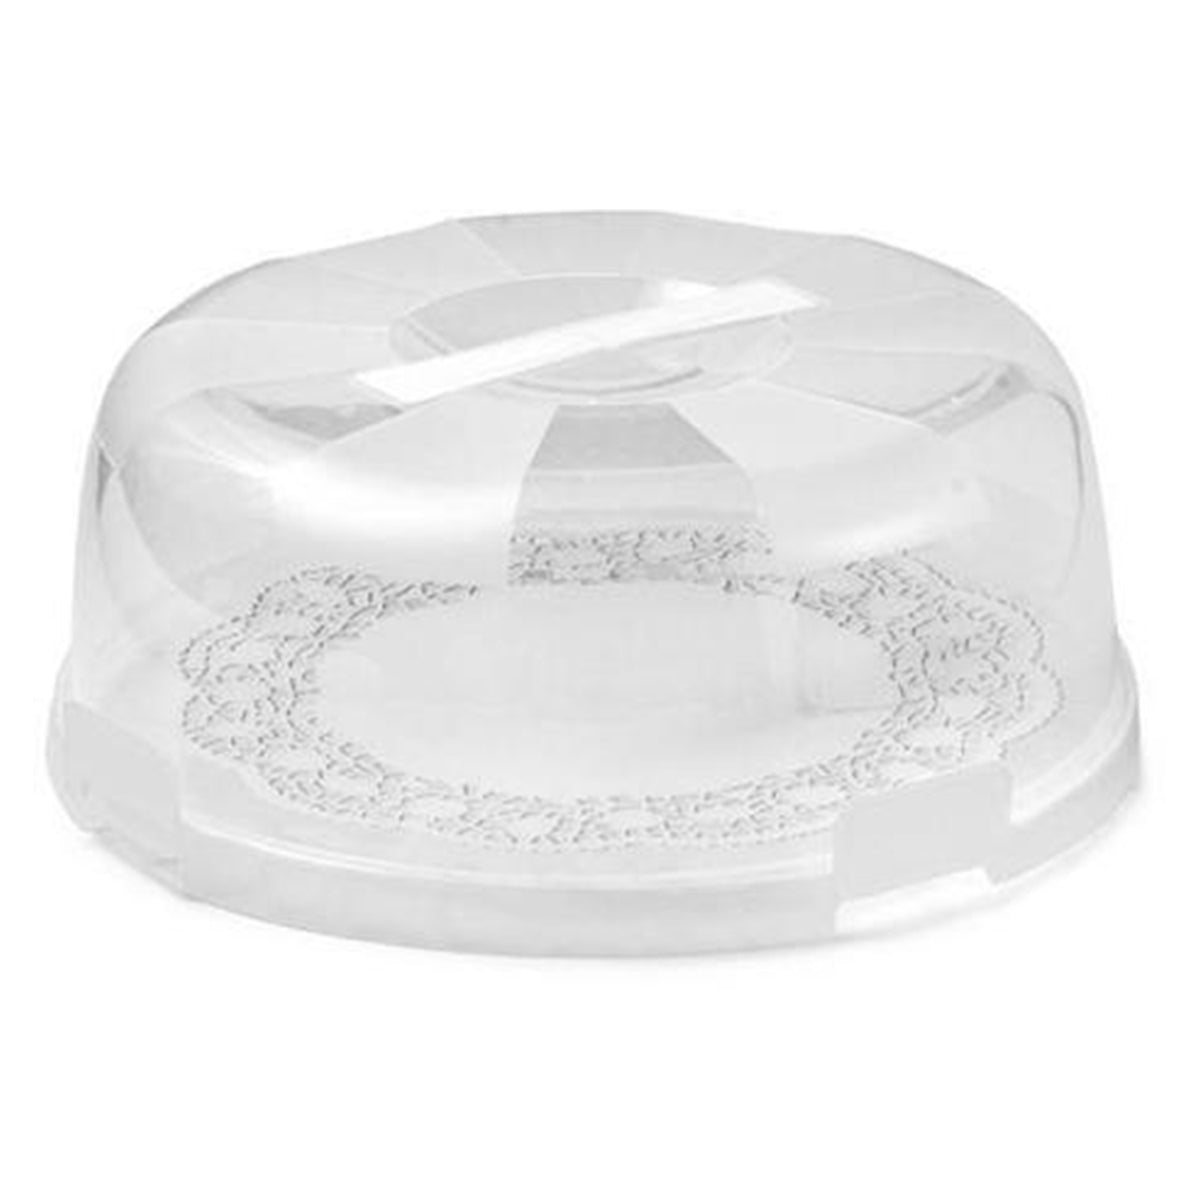 Delice Cake Carrier